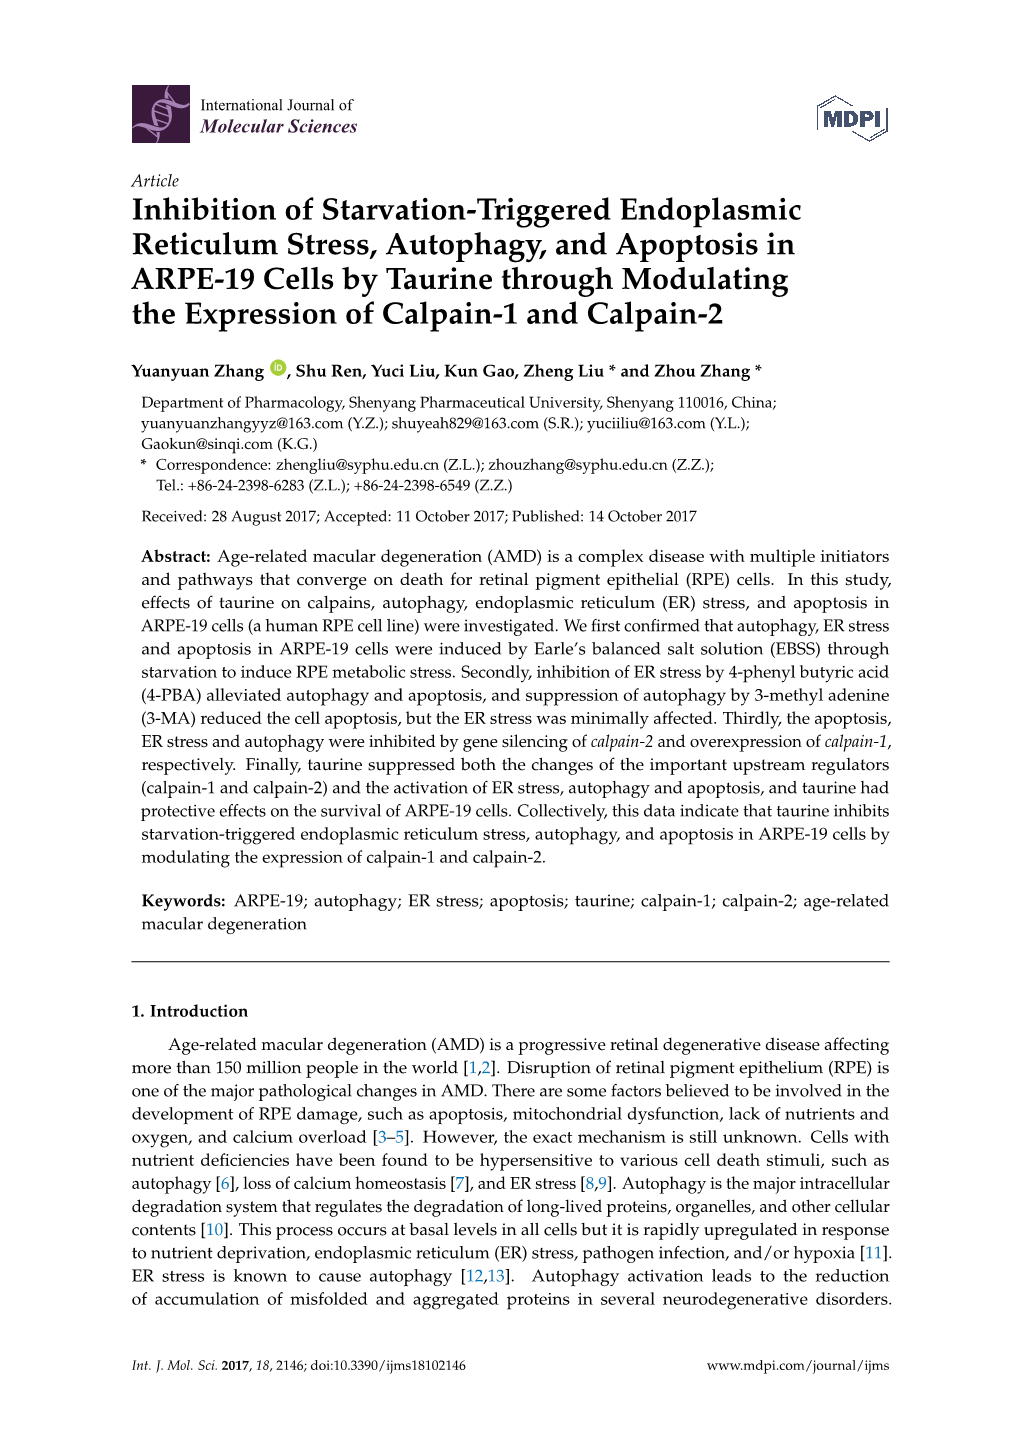 Inhibition of Starvation-Triggered Endoplasmic Reticulum Stress, Autophagy, and Apoptosis in ARPE-19 Cells by Taurine Through Mo